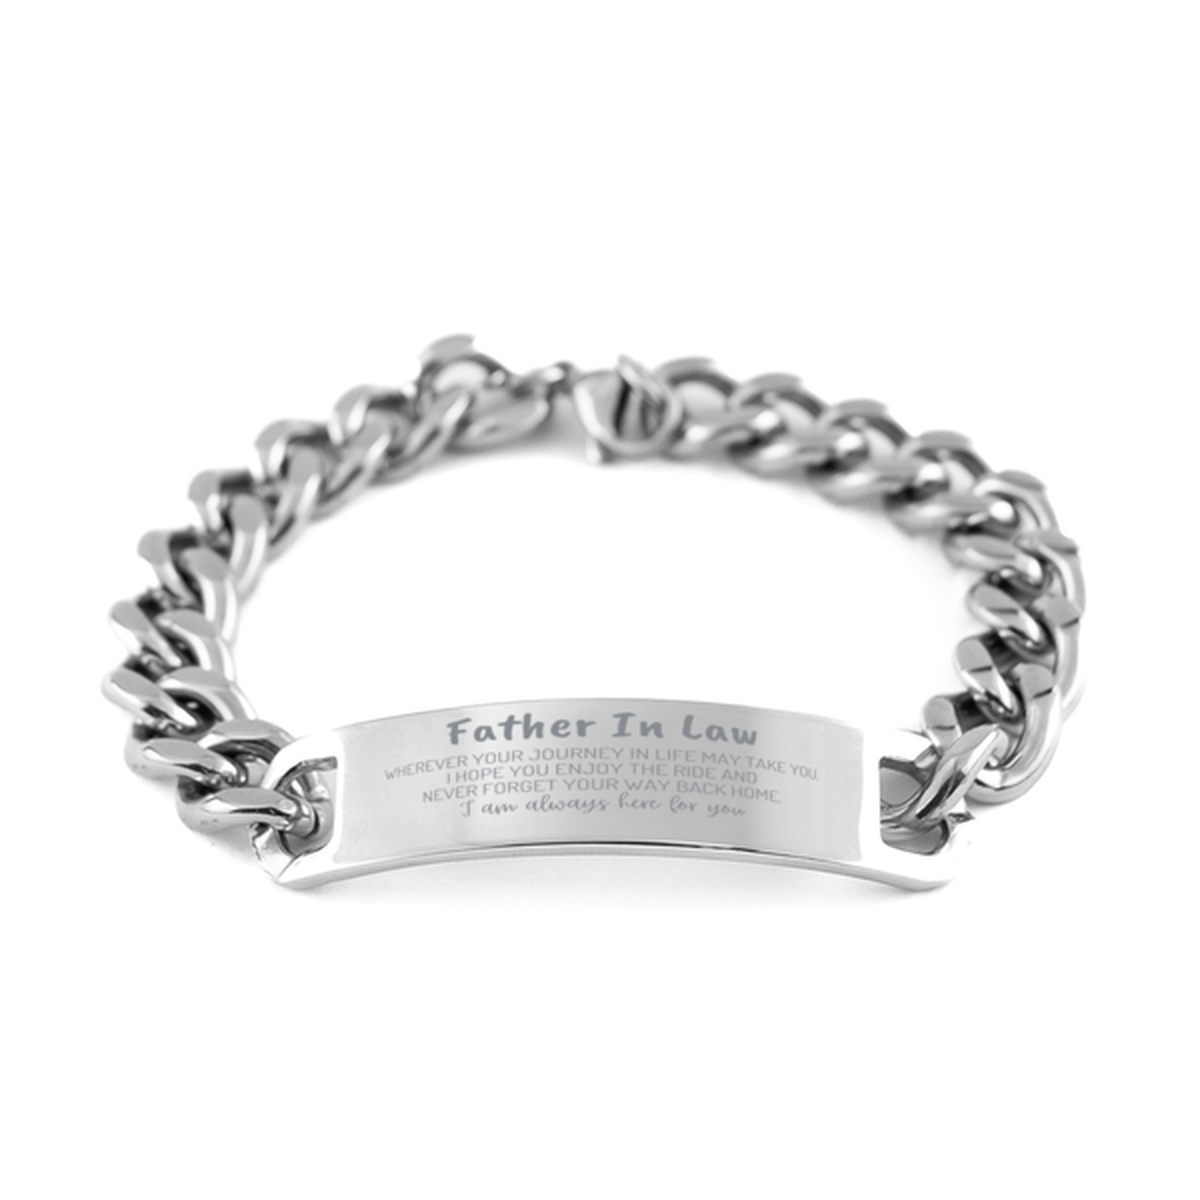 Father In Law wherever your journey in life may take you, I am always here for you Father In Law Cuban Chain Stainless Steel Bracelet, Awesome Christmas Gifts For Father In Law, Father In Law Birthday Gifts for Men Women Family Loved One